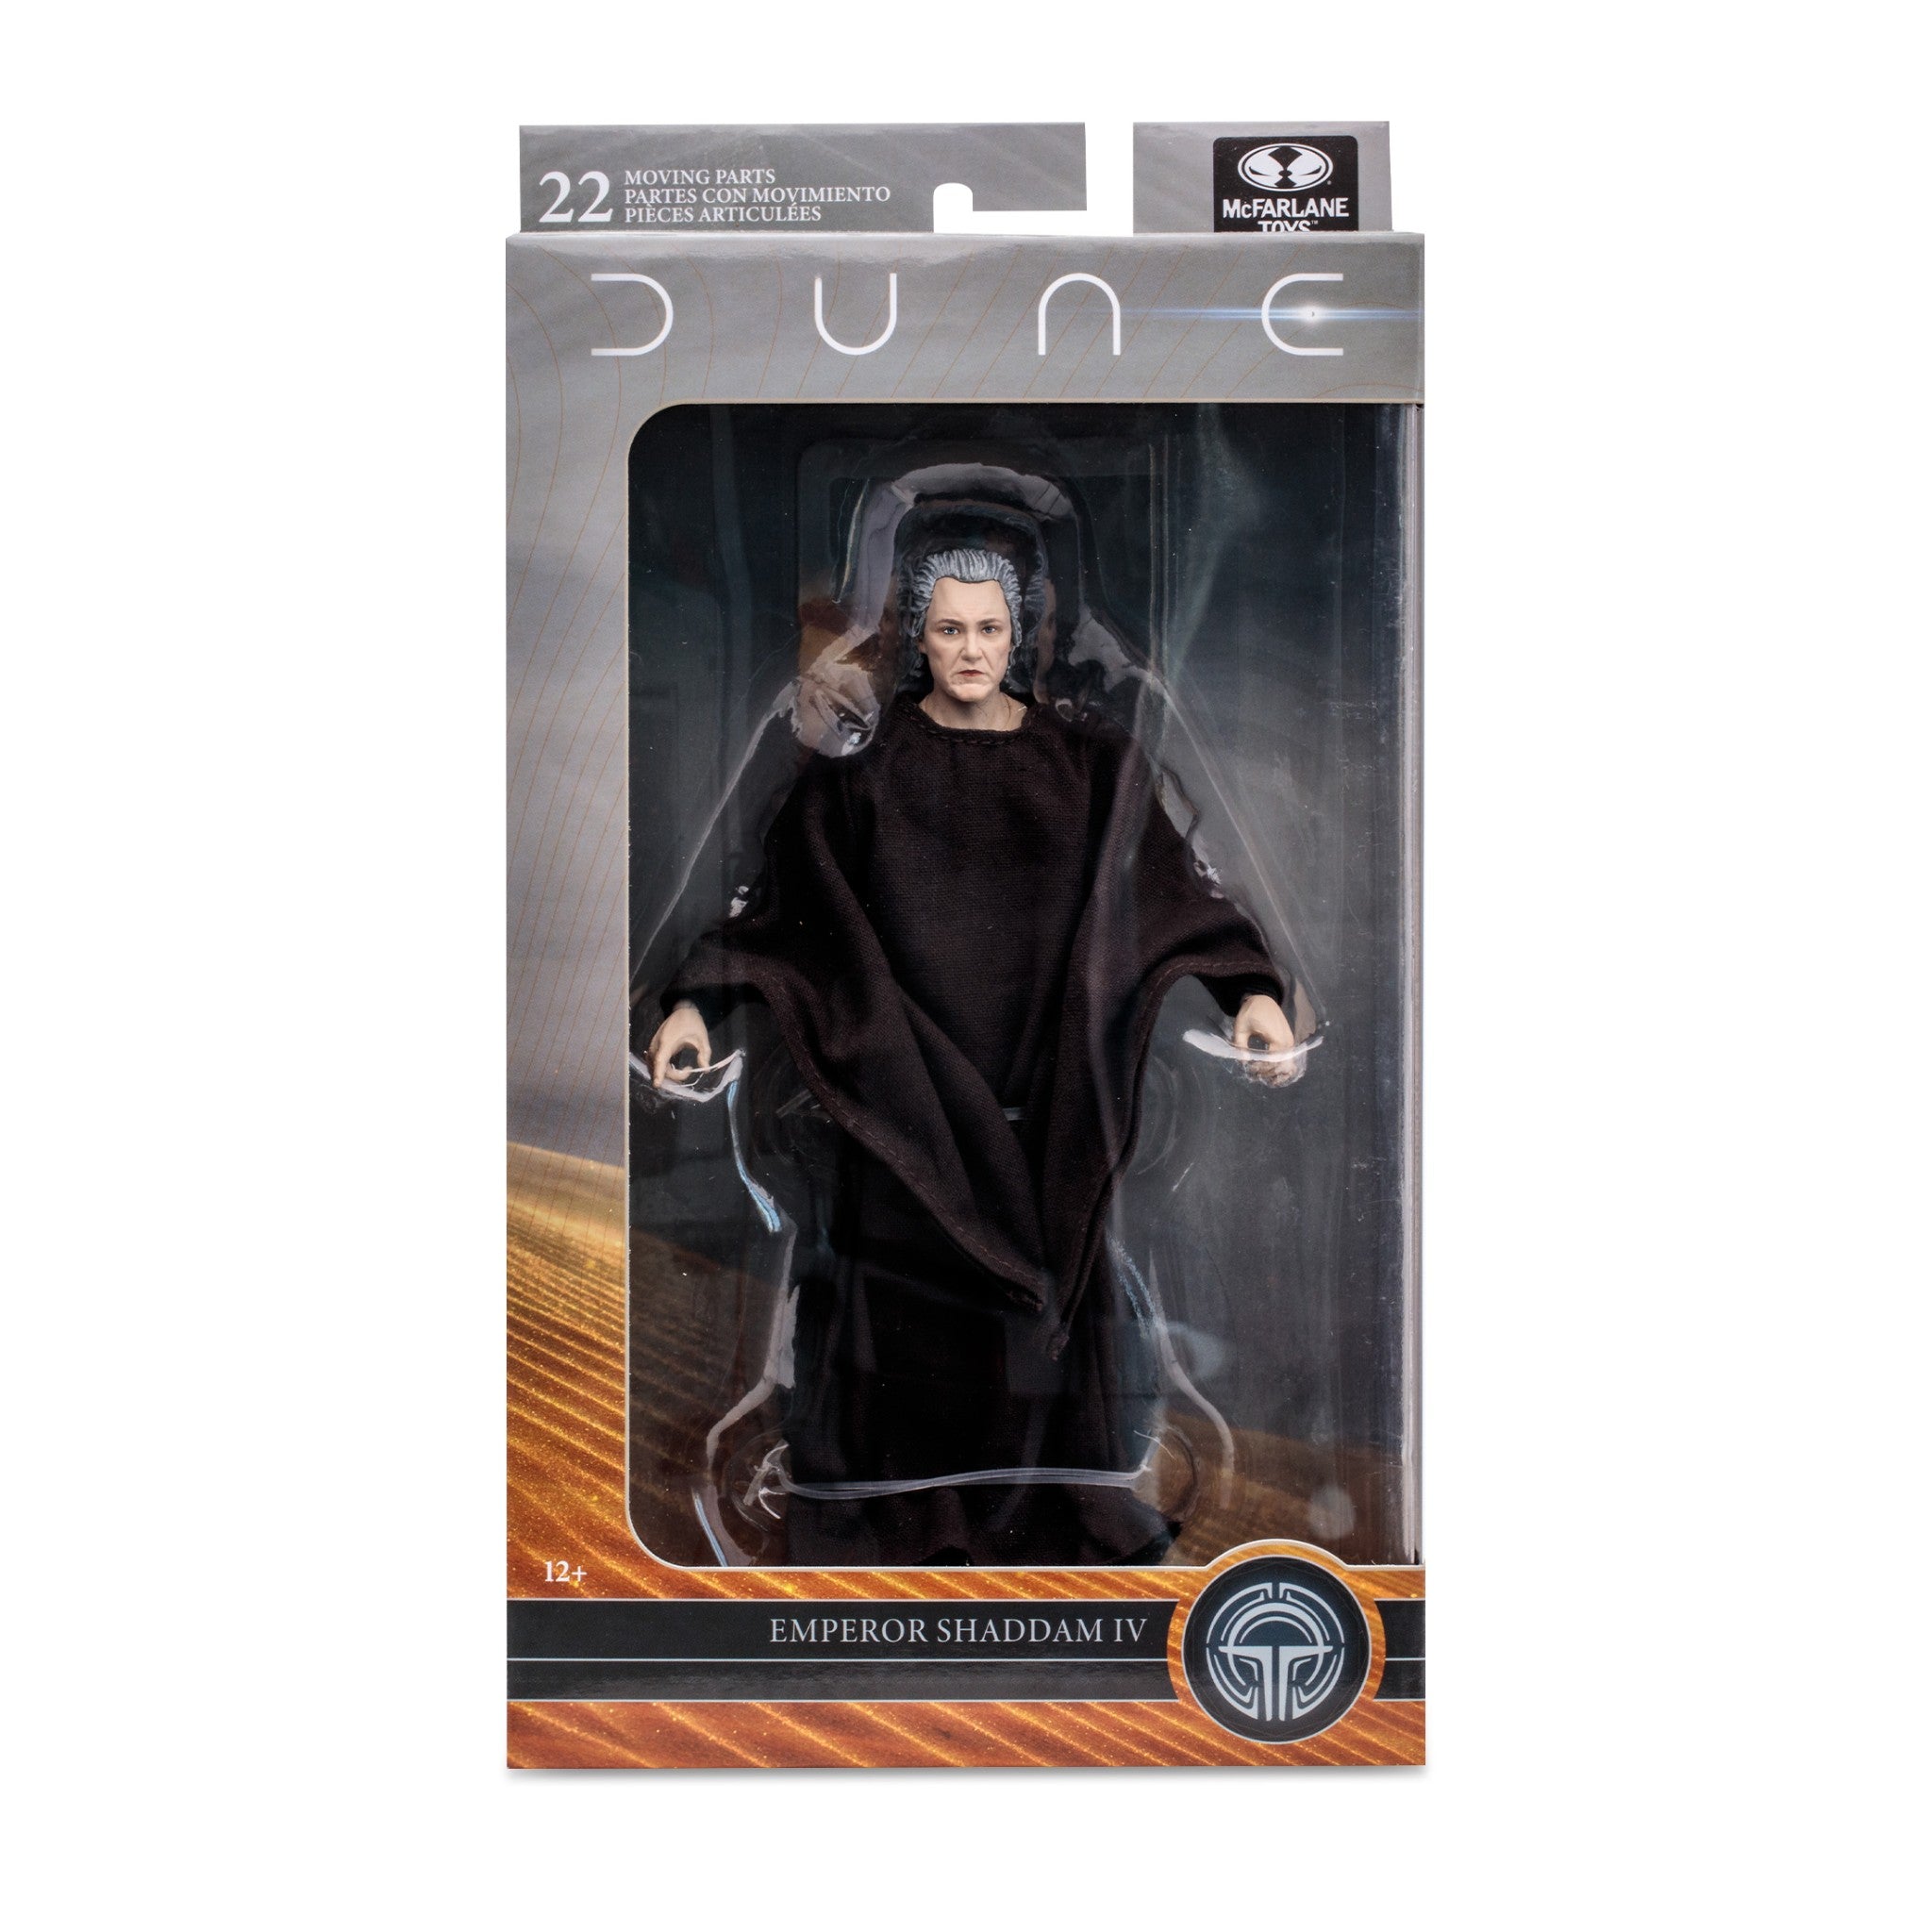 Dune Movie Part Two 2 Emperor Shaddam IV 7" Action Figure - McFarlane Toys